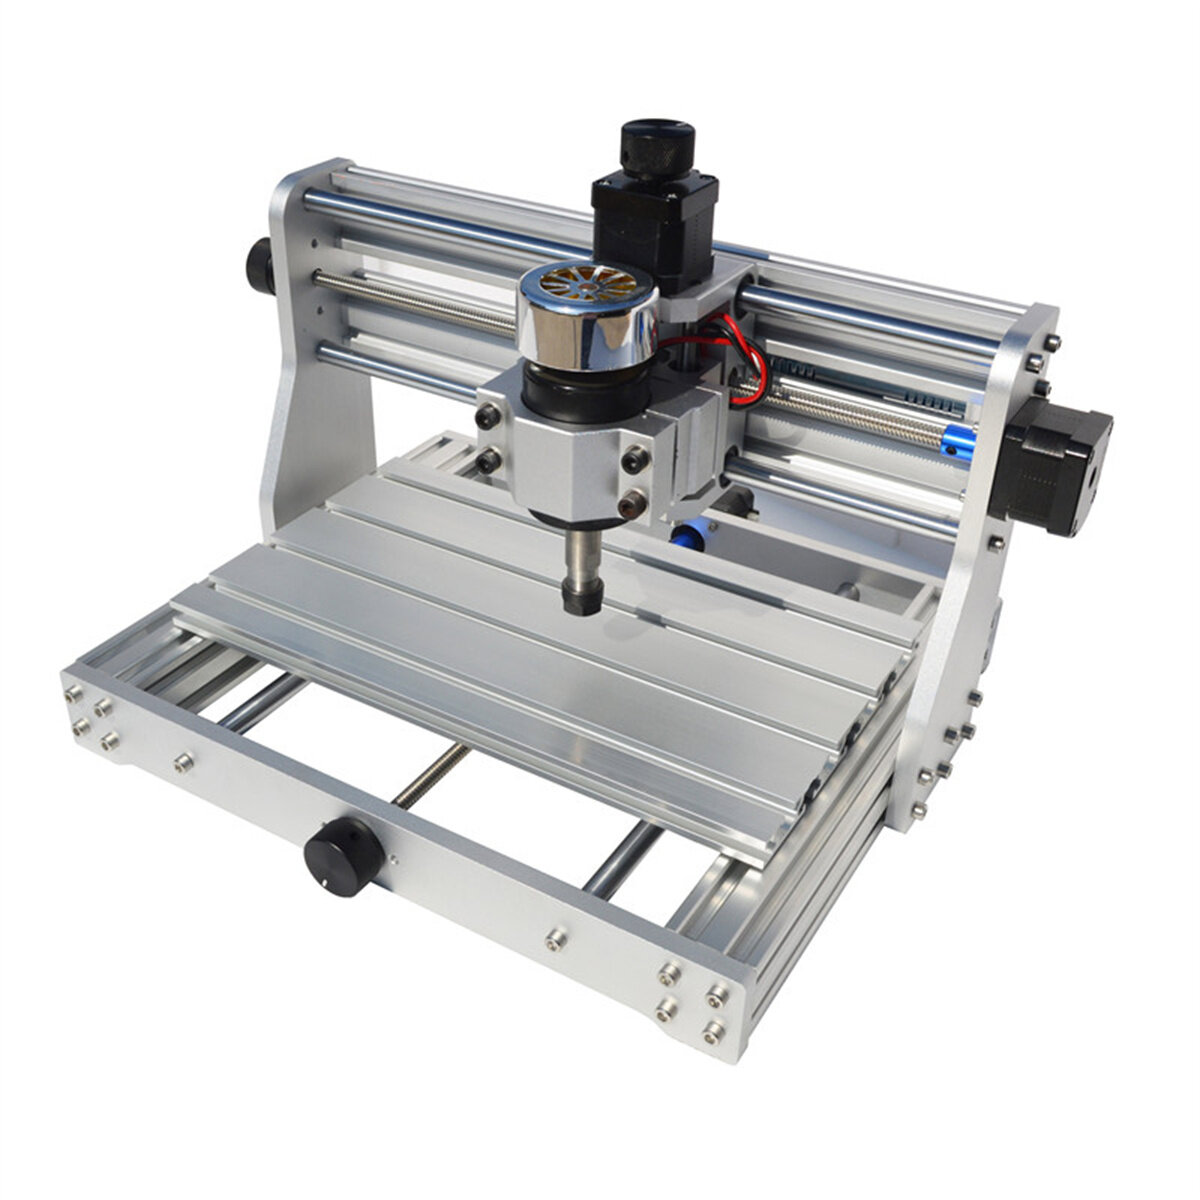 best price,fanensheng,cnc,3018,max,router,engraving,machine,coupon,price,discount